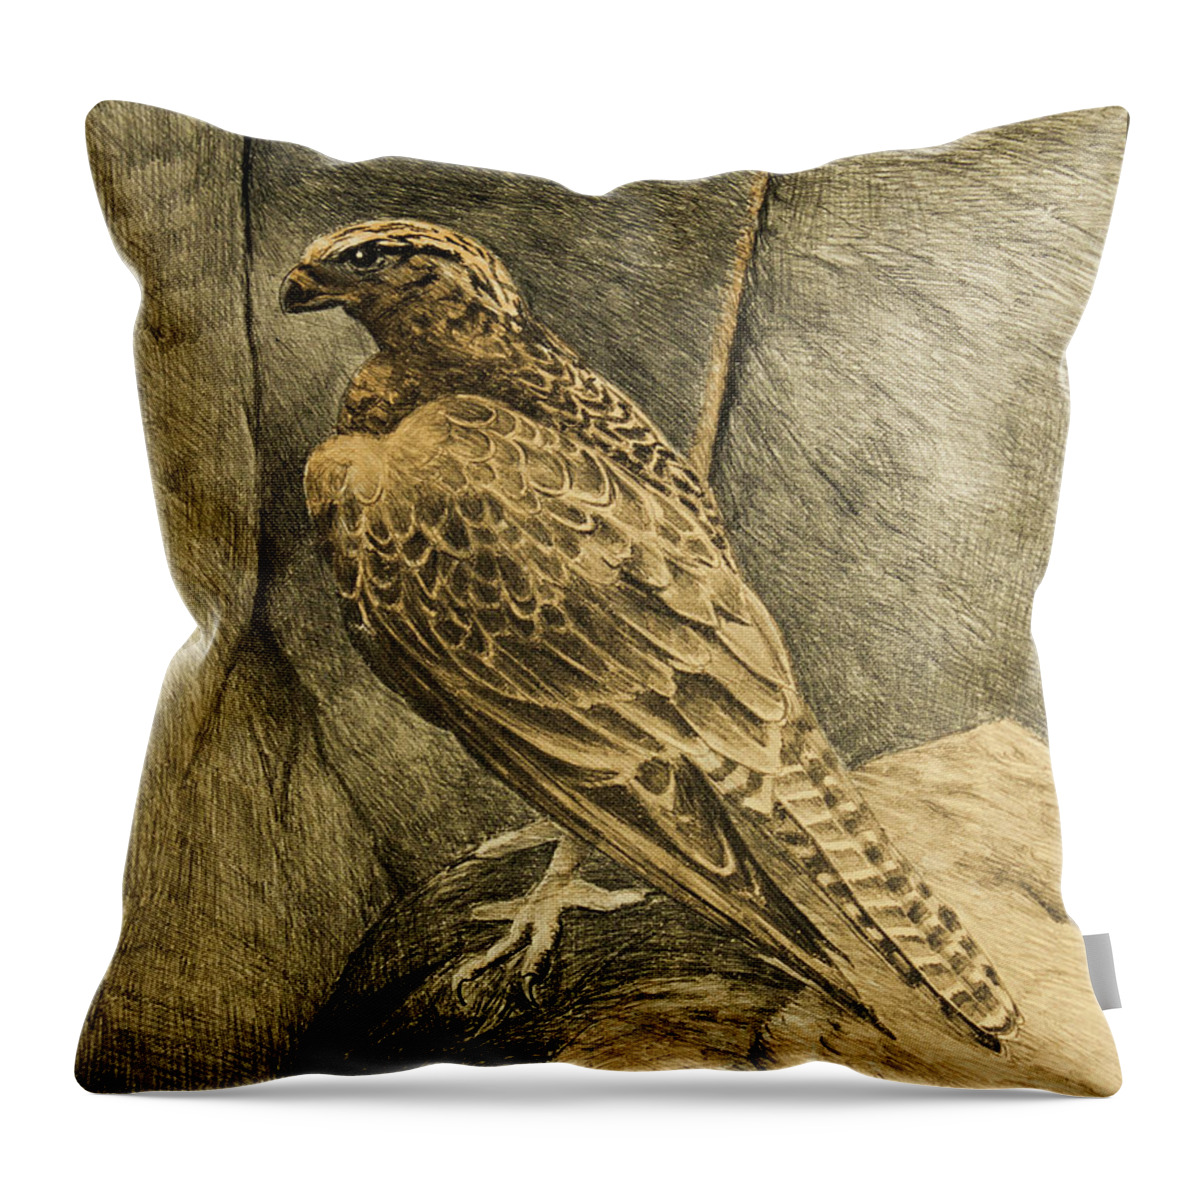 Gyrfalcon Throw Pillow featuring the drawing Gyrfalcon by Hans Egil Saele